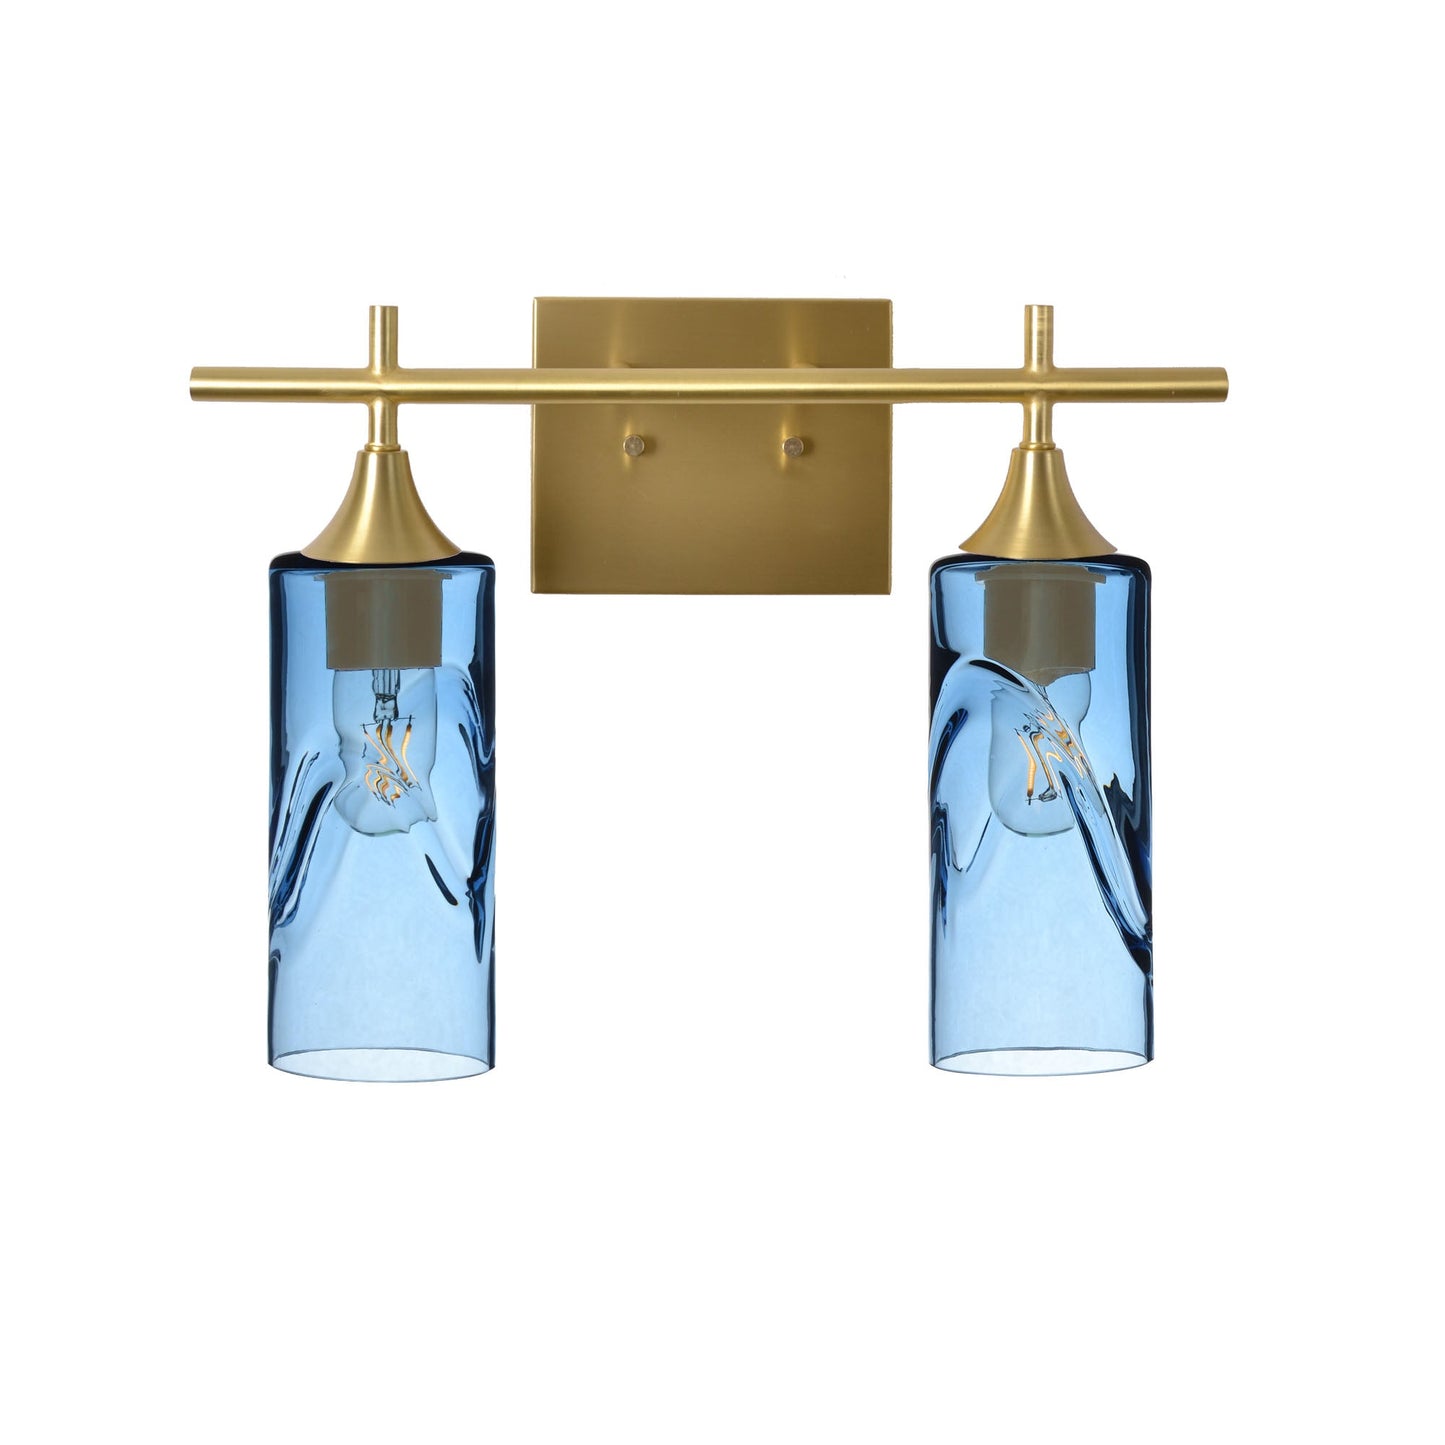 513 Swell: 2 Light Wall Vanity-Glass-Bicycle Glass Co - Hotshop-Steel Blue-Satin Brass-Bicycle Glass Co